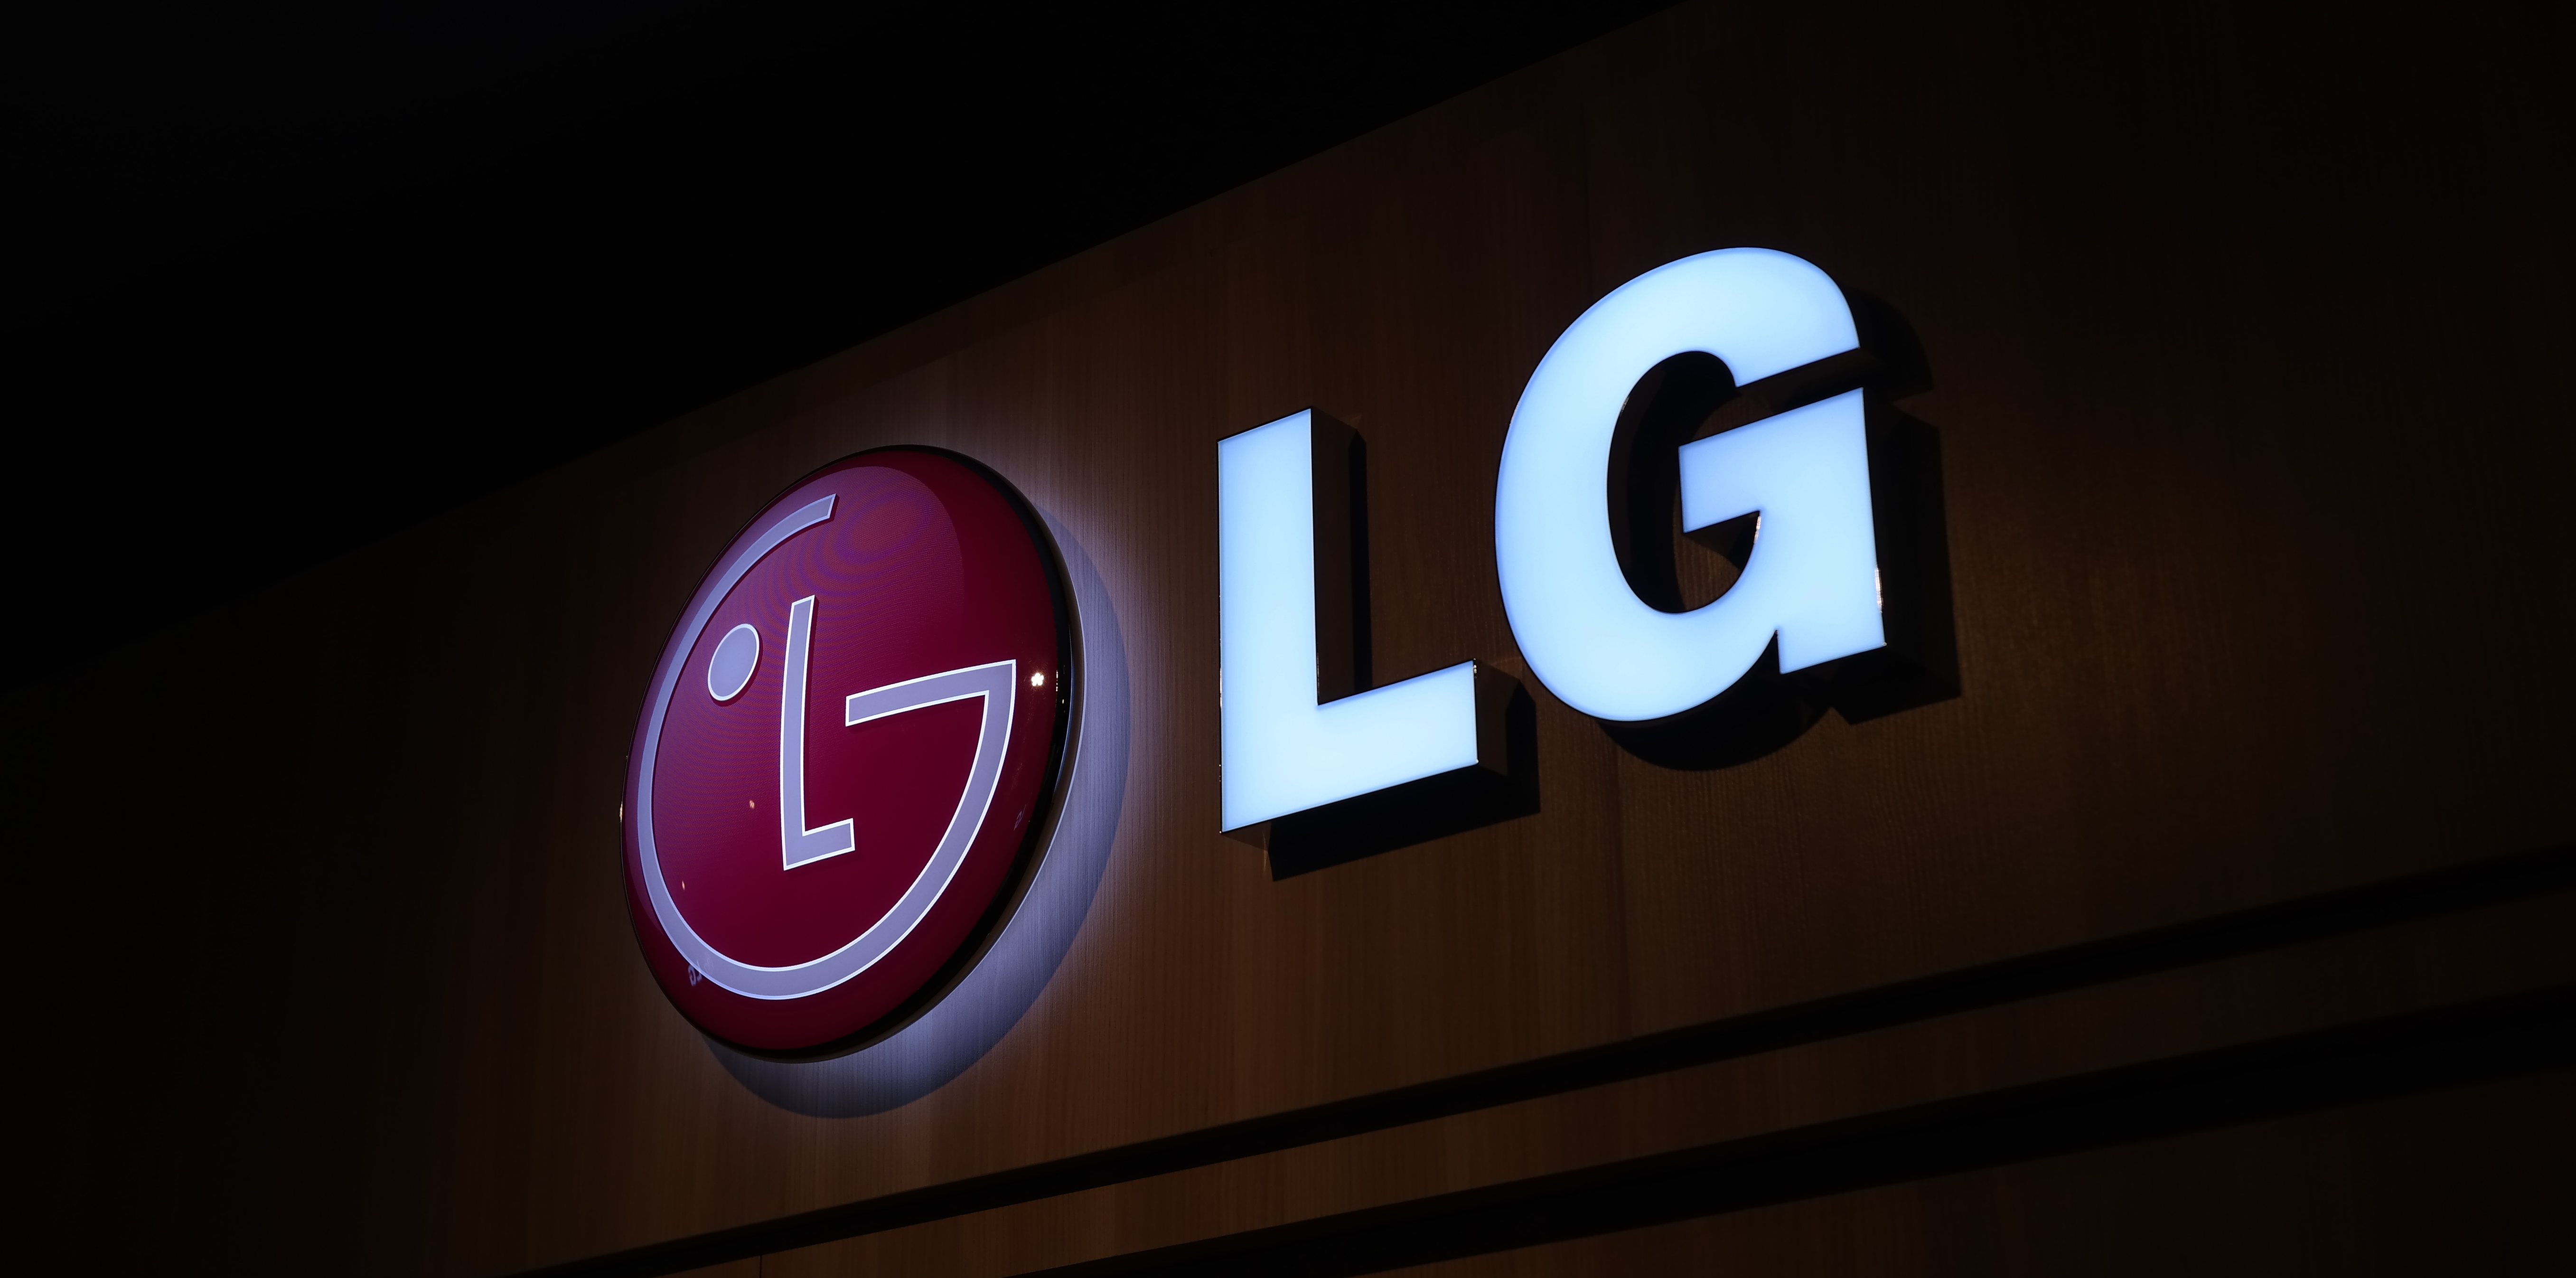 lg-s-annual-profit-doubles-to-475m-after-shipping-59-1m-smartphones-in